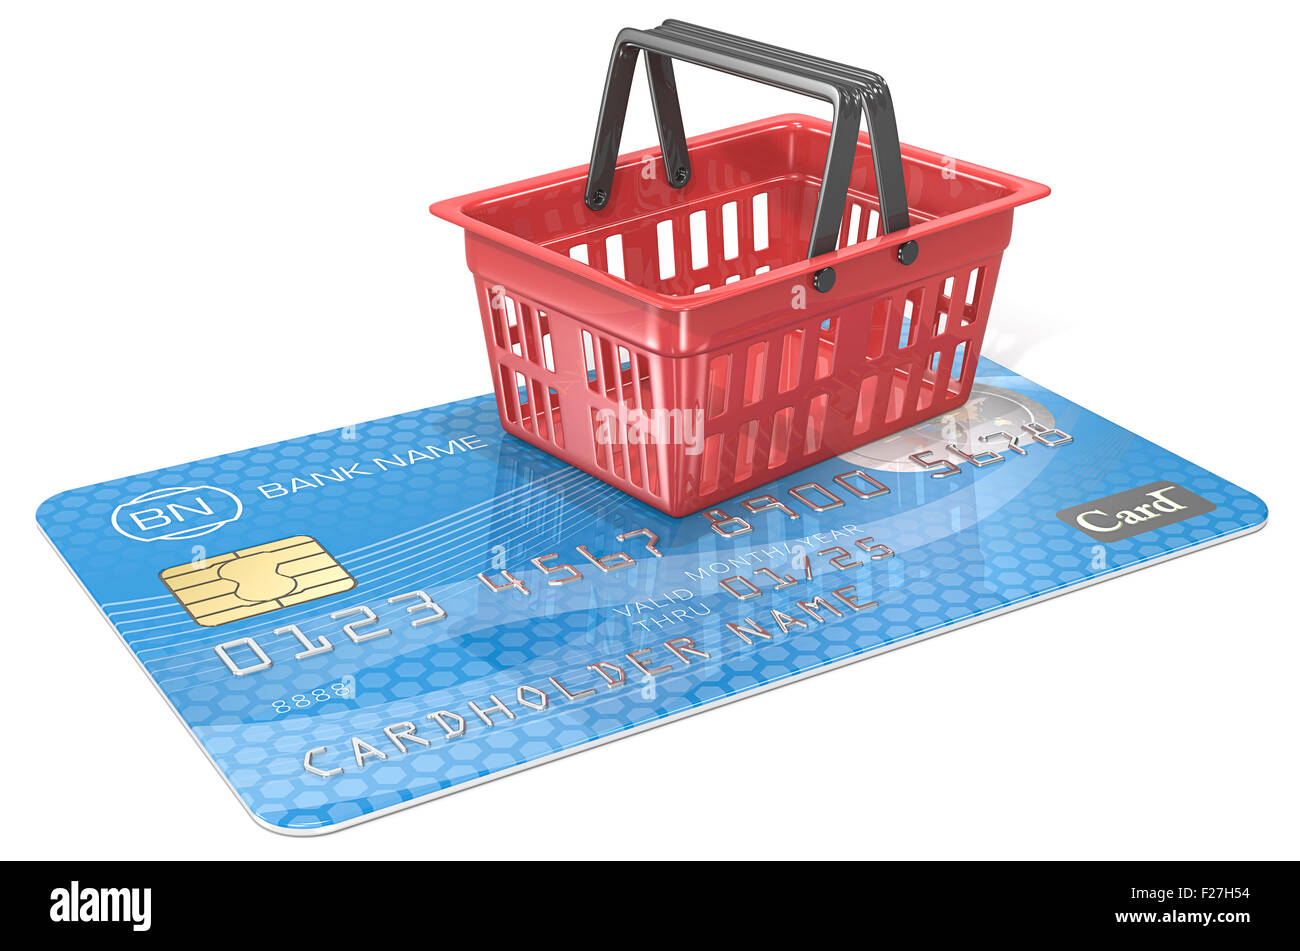 Credit Card with Shopping Basket. Blue and red. Generic name,numbers and logo. Stock Photo